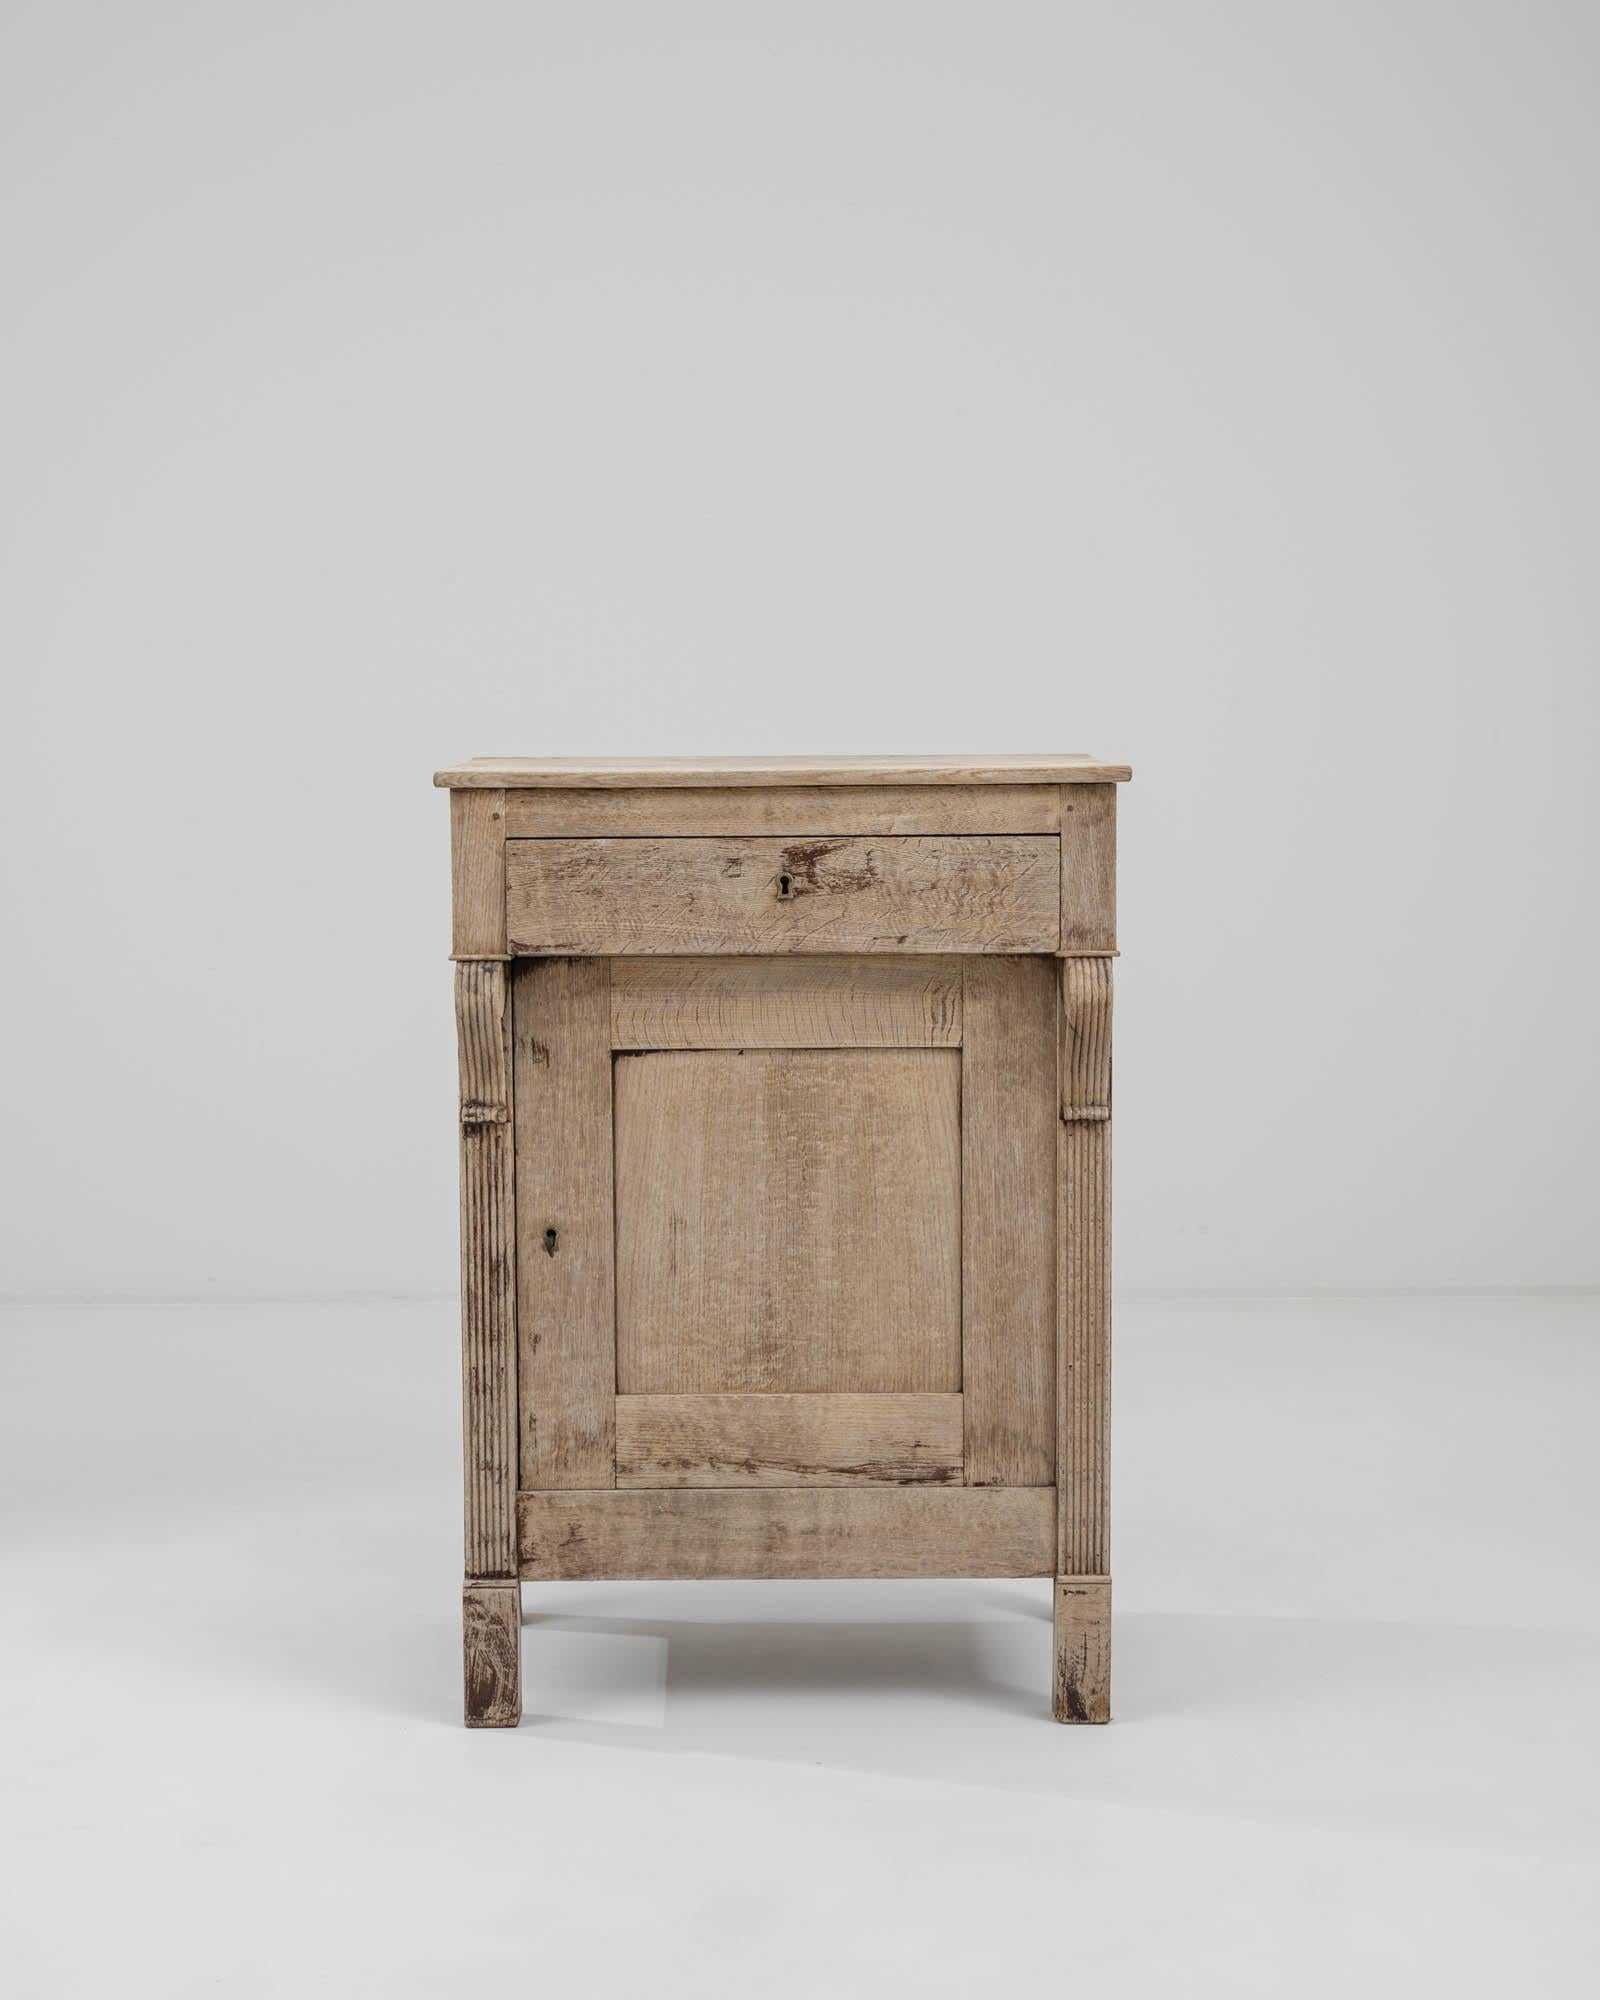 This delightful antique oak buffet combines a dignified Empire aesthetic with a bright natural finish. Made in France in the 1800s, fluted pilasters and an overhanging upper drawer lend an architectural majesty to the simple lower cupboard. Carved